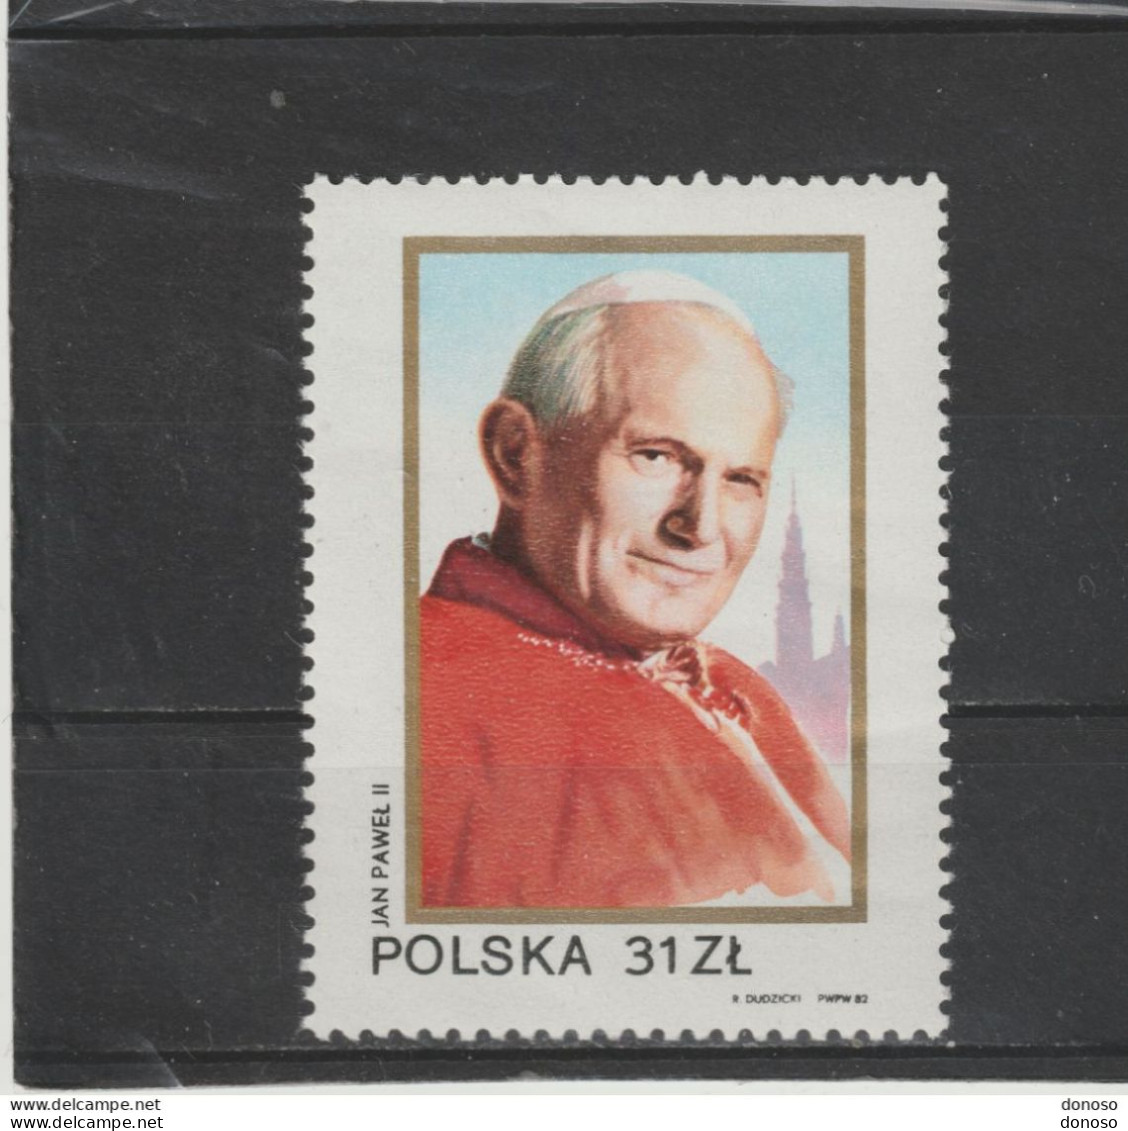 POLOGNE 1983 PAPE JEAN PAUL II Yvert 2681, Michel 2868 NEUF** MNH - Unused Stamps